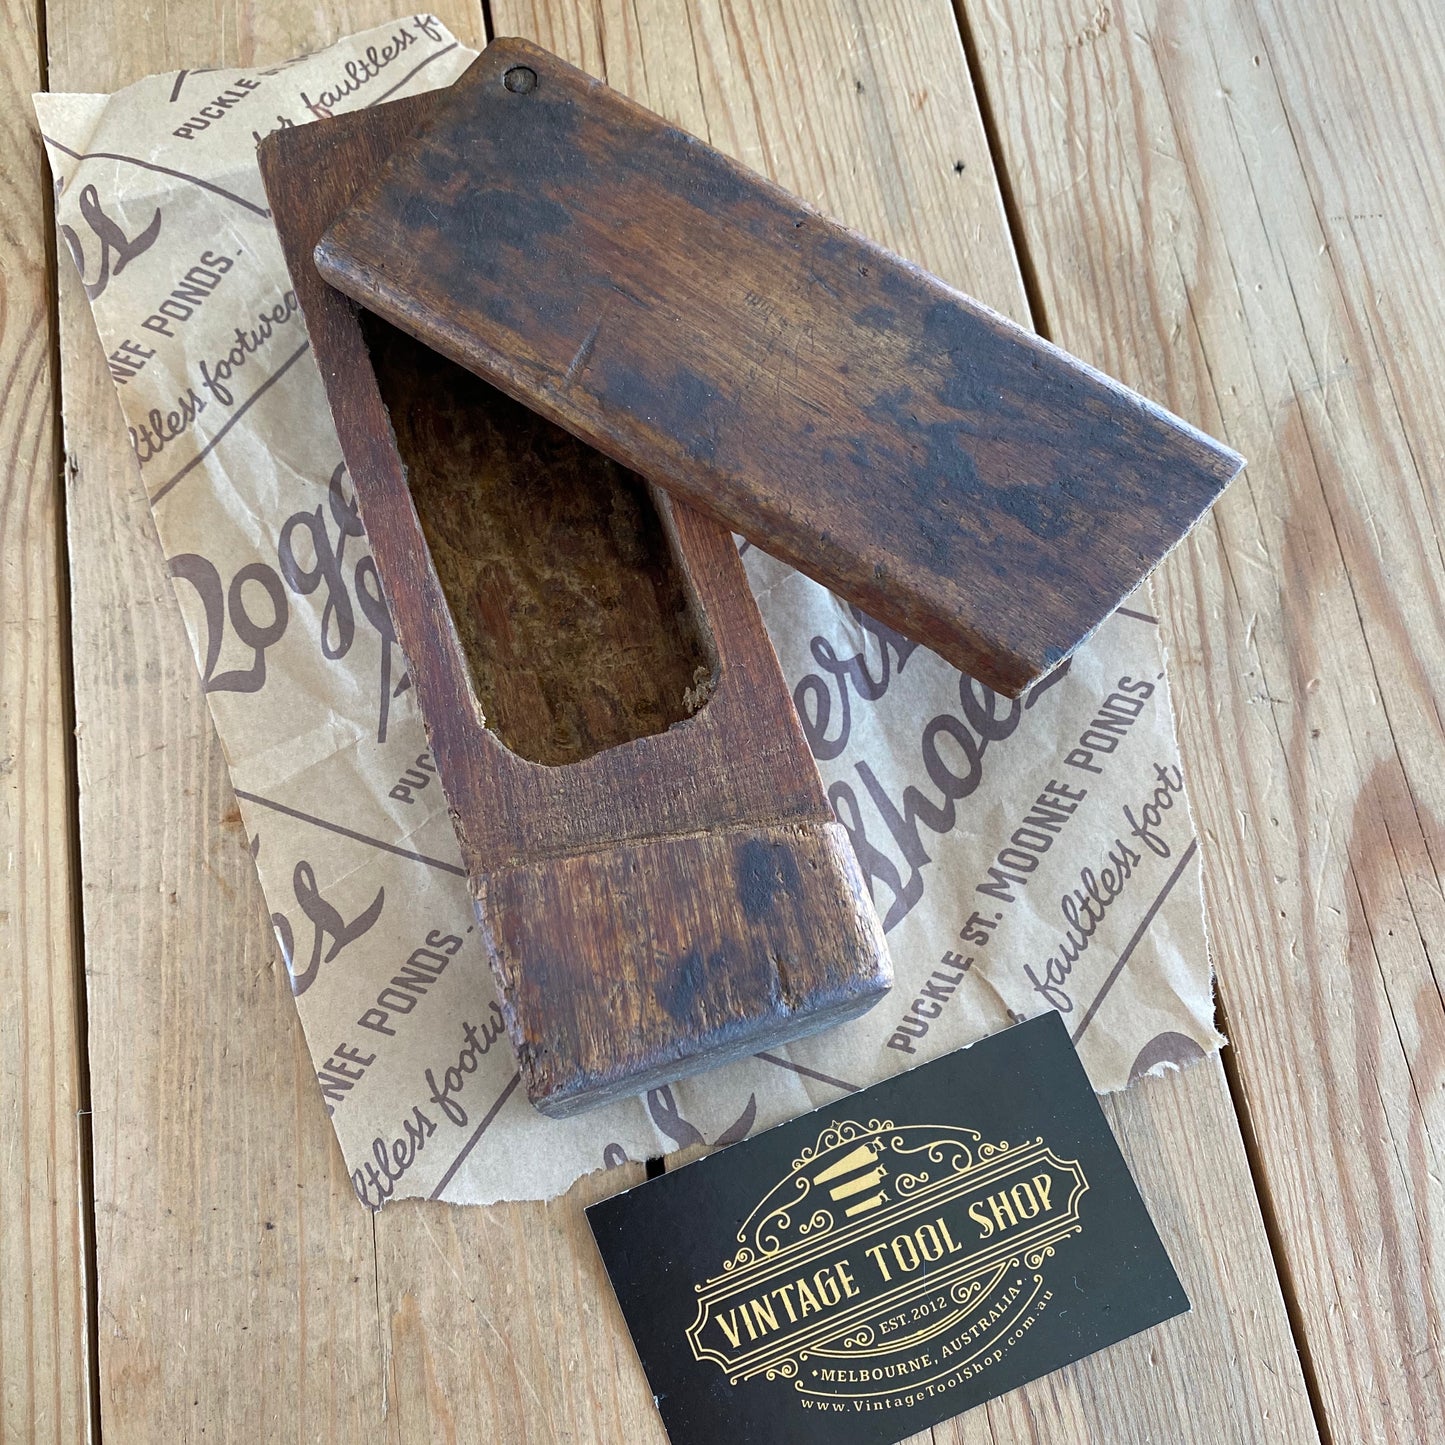 SOLD Antique FRENCH wooden GREASE BOX Y1646